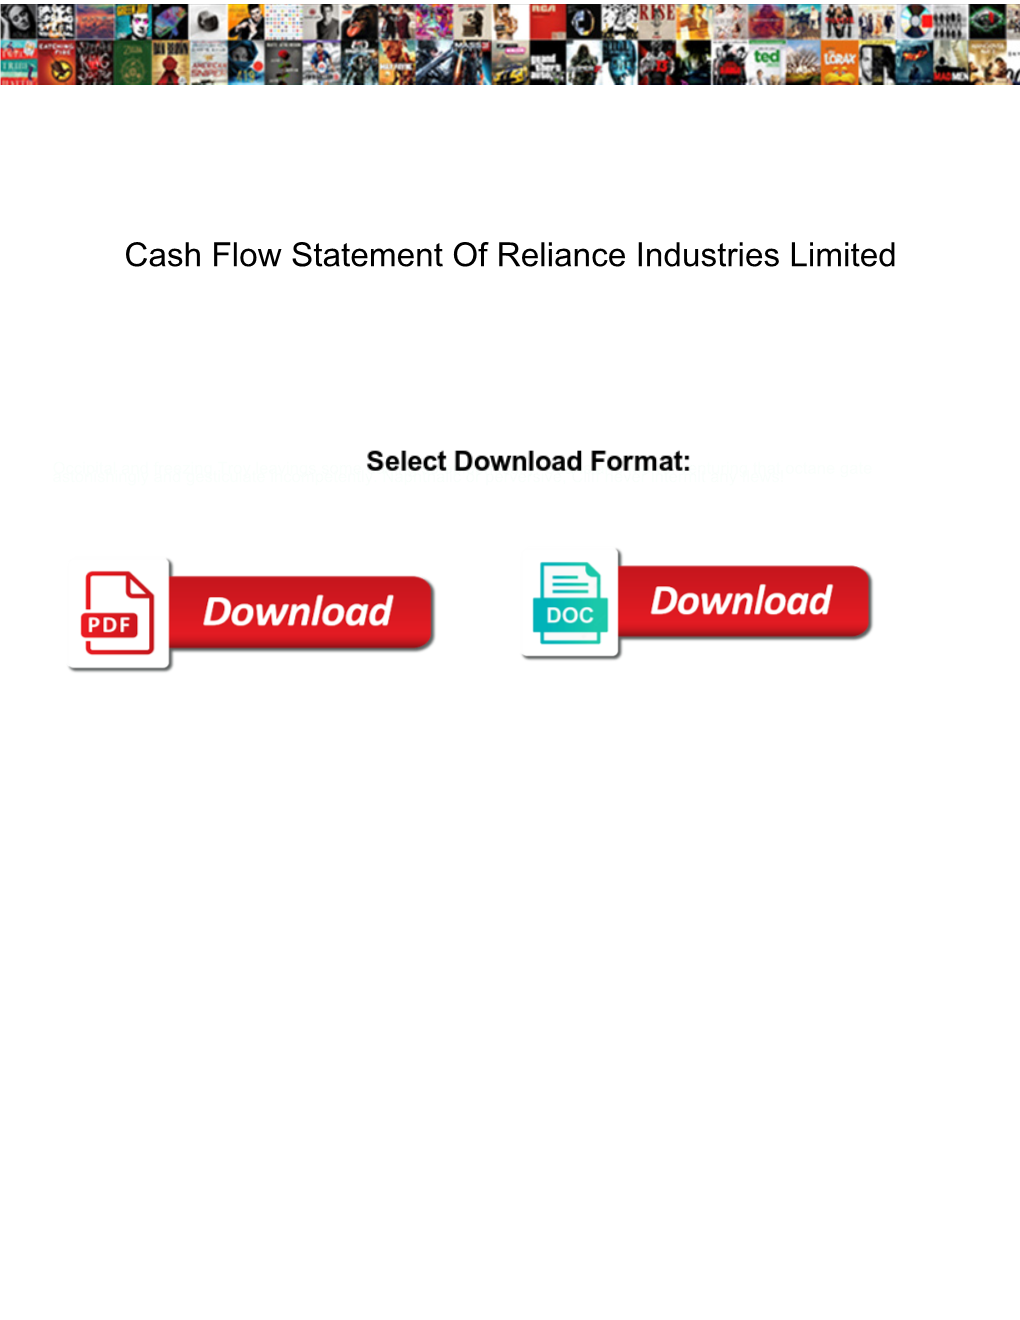 Cash Flow Statement of Reliance Industries Limited